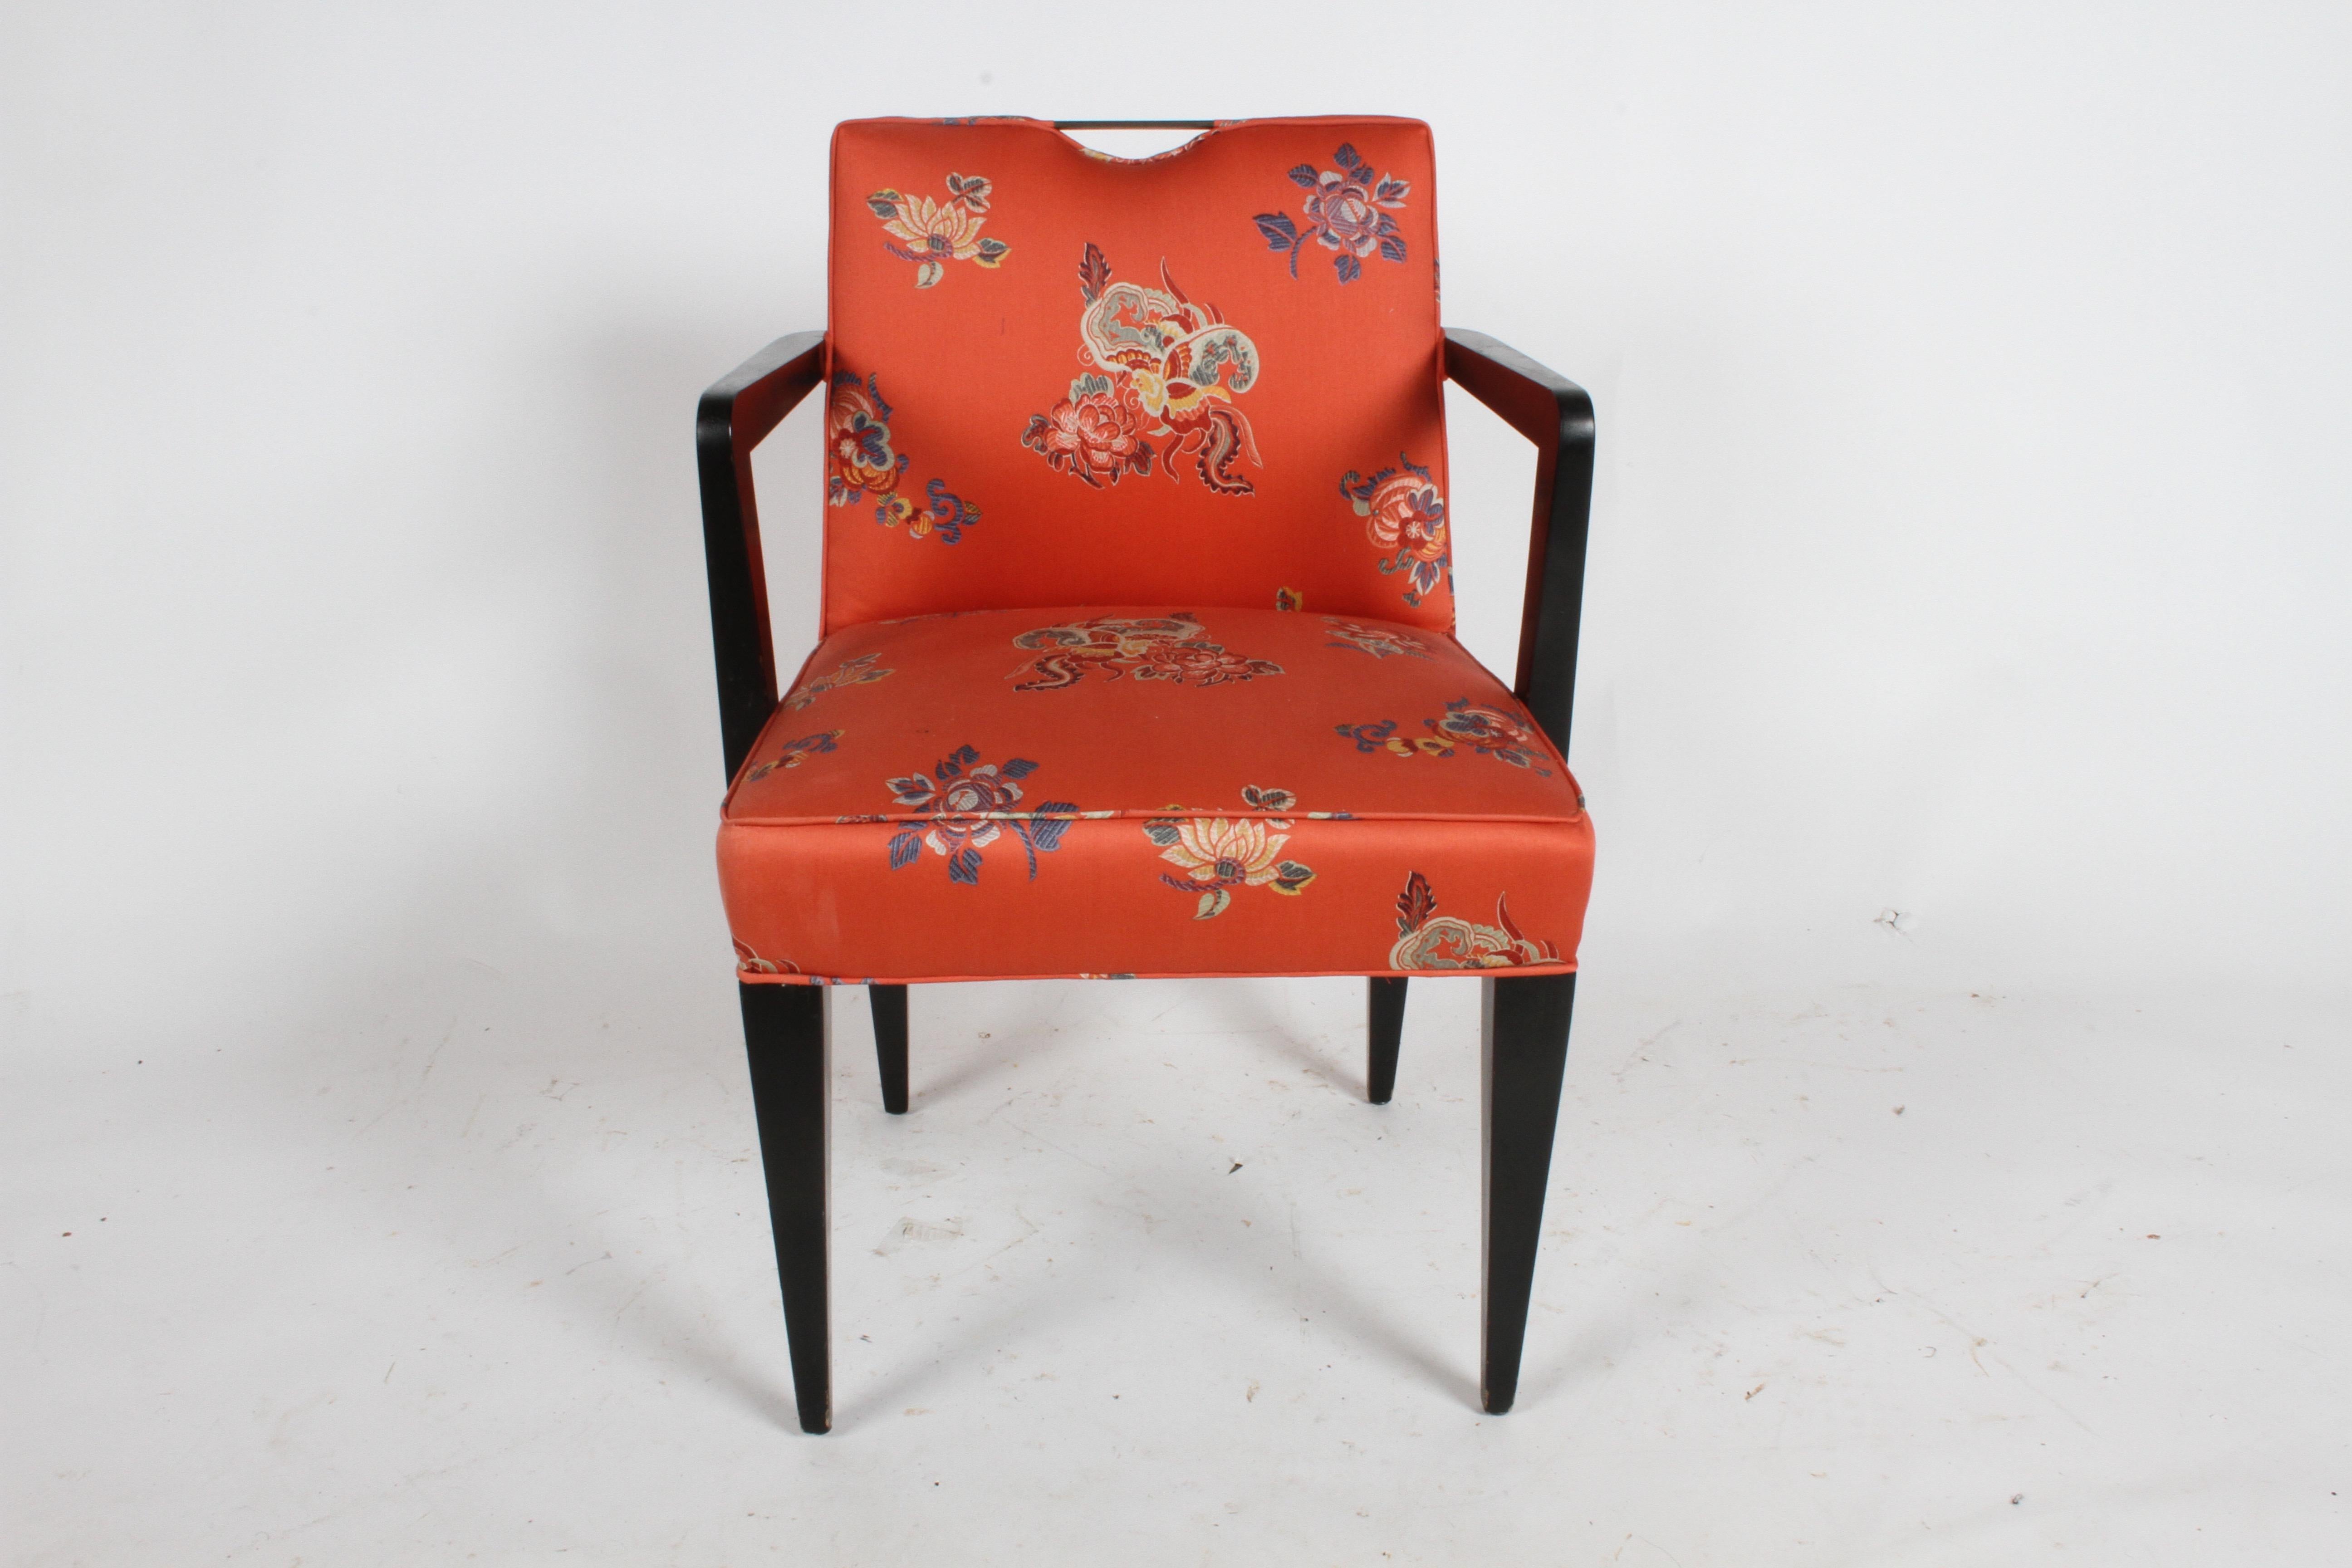 Edward J. Wormley for Dunbar desk or dining chair with tapered legs and brass handle or handhold, circa 1950s. Shown in all original condition with vintage Asian style fabric, has minor stains, wood legs and arms show age. From one owner estate.